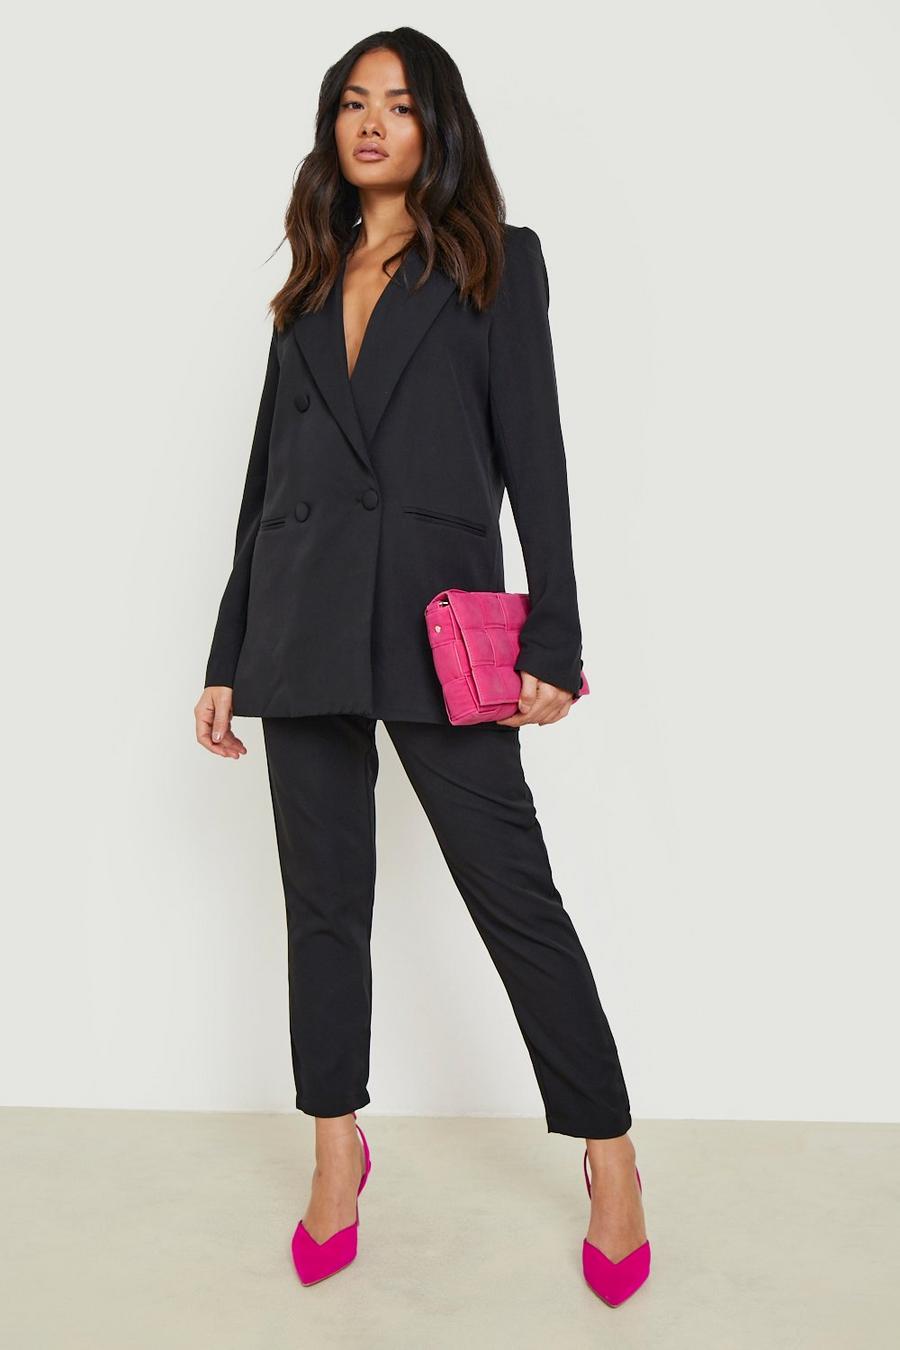 Black Tailored Ankle Grazer Pants